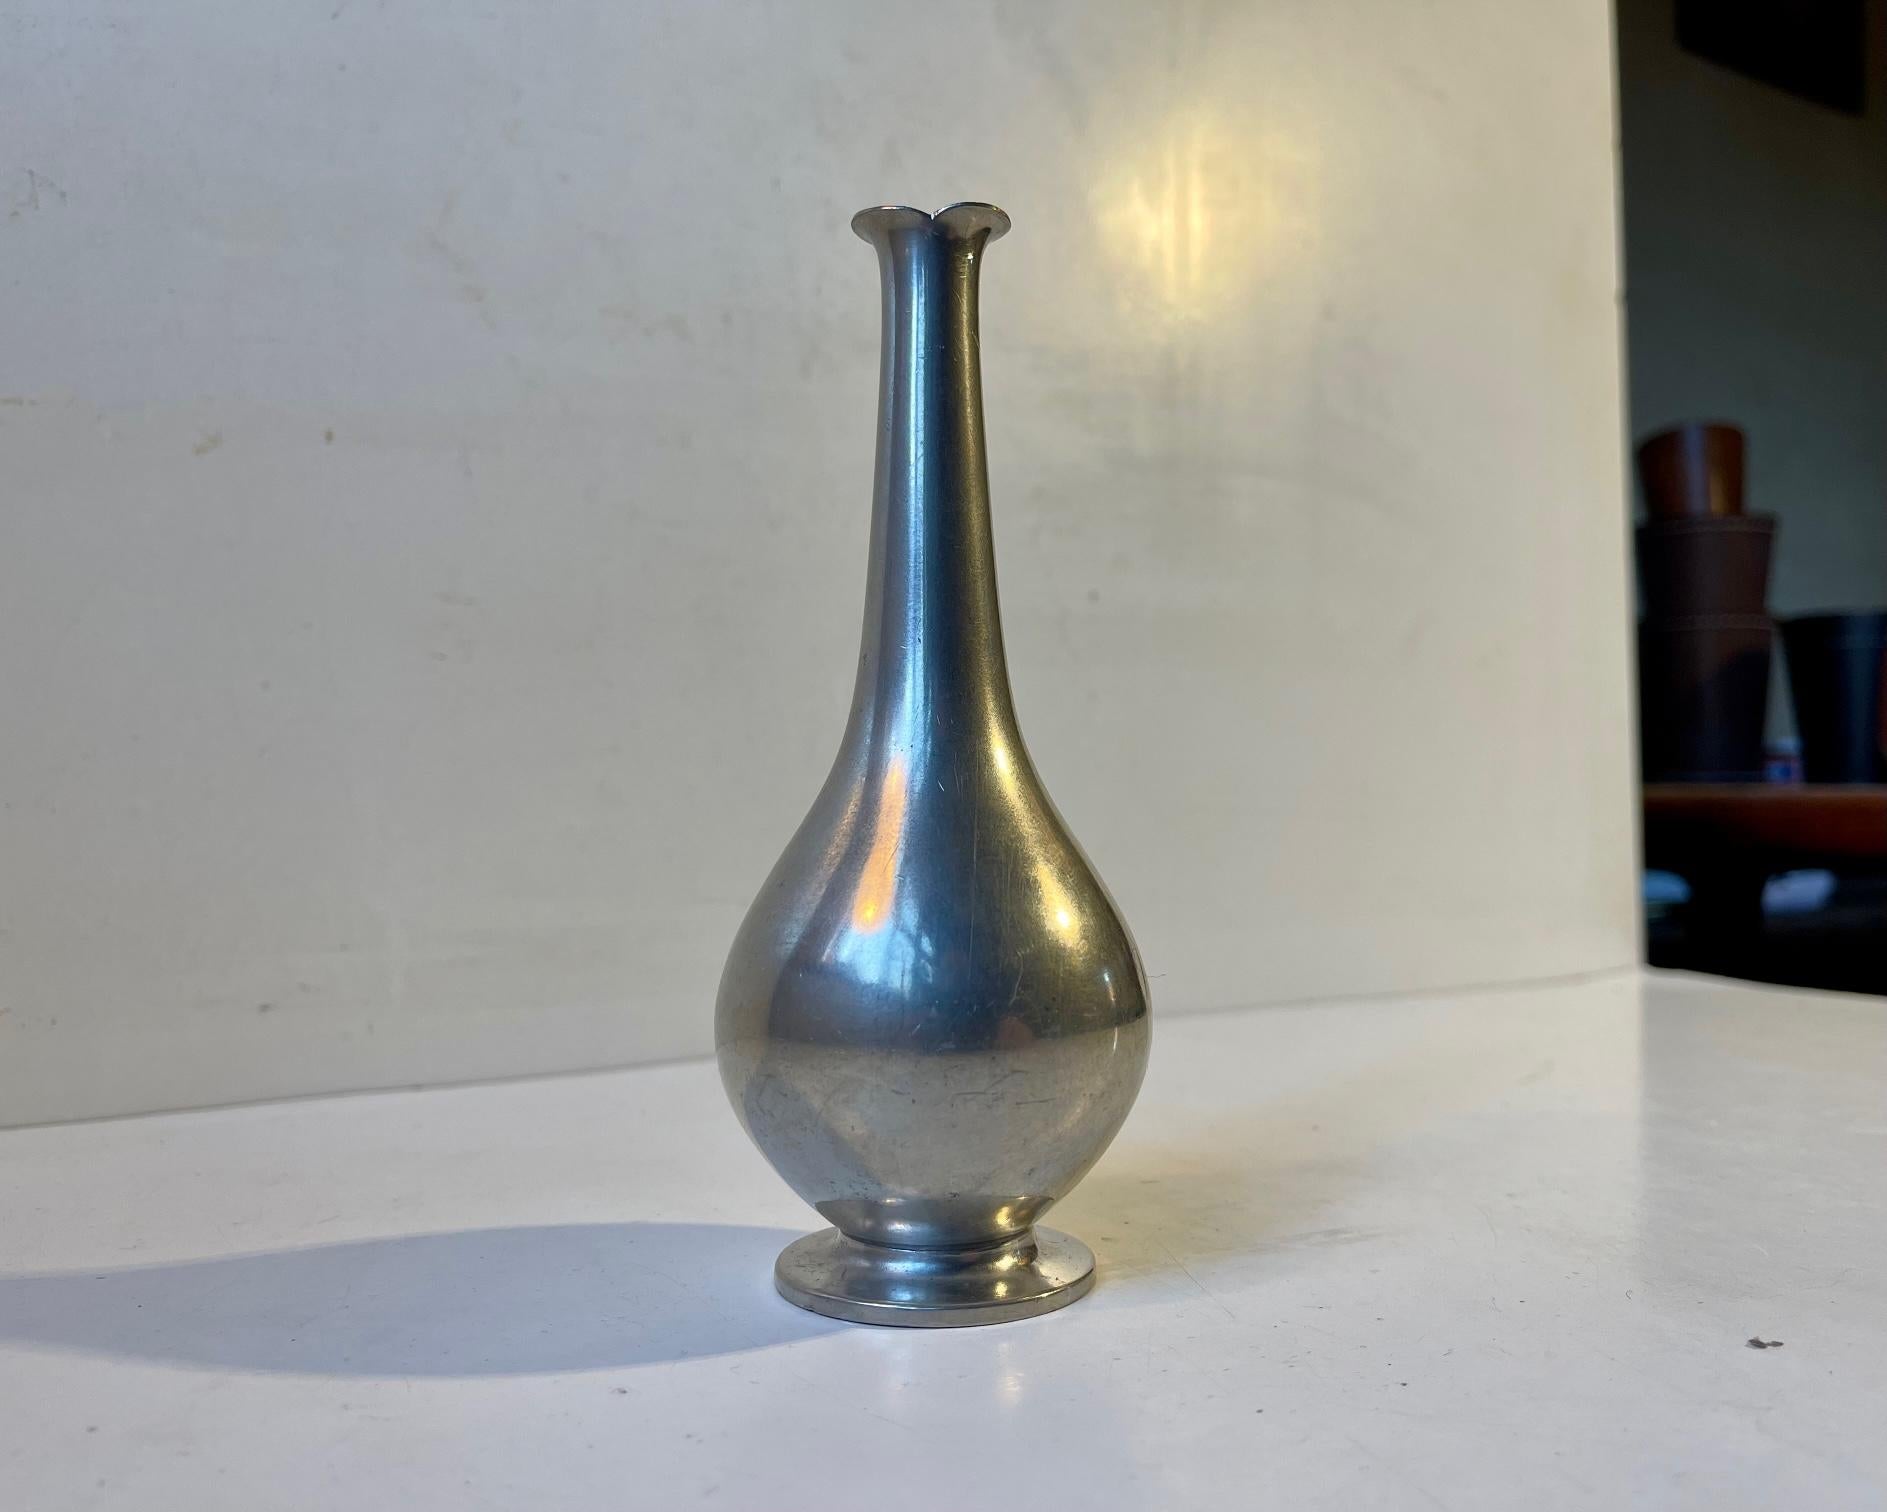 A small pewter vase with long neck. Designed and manufactured by Just Andersen in Denmark during the 1930s. Imprinted to its base: Just, Danmark, 1157. Measurements: H: 14.5 cm, W/D: 5,5 cm.